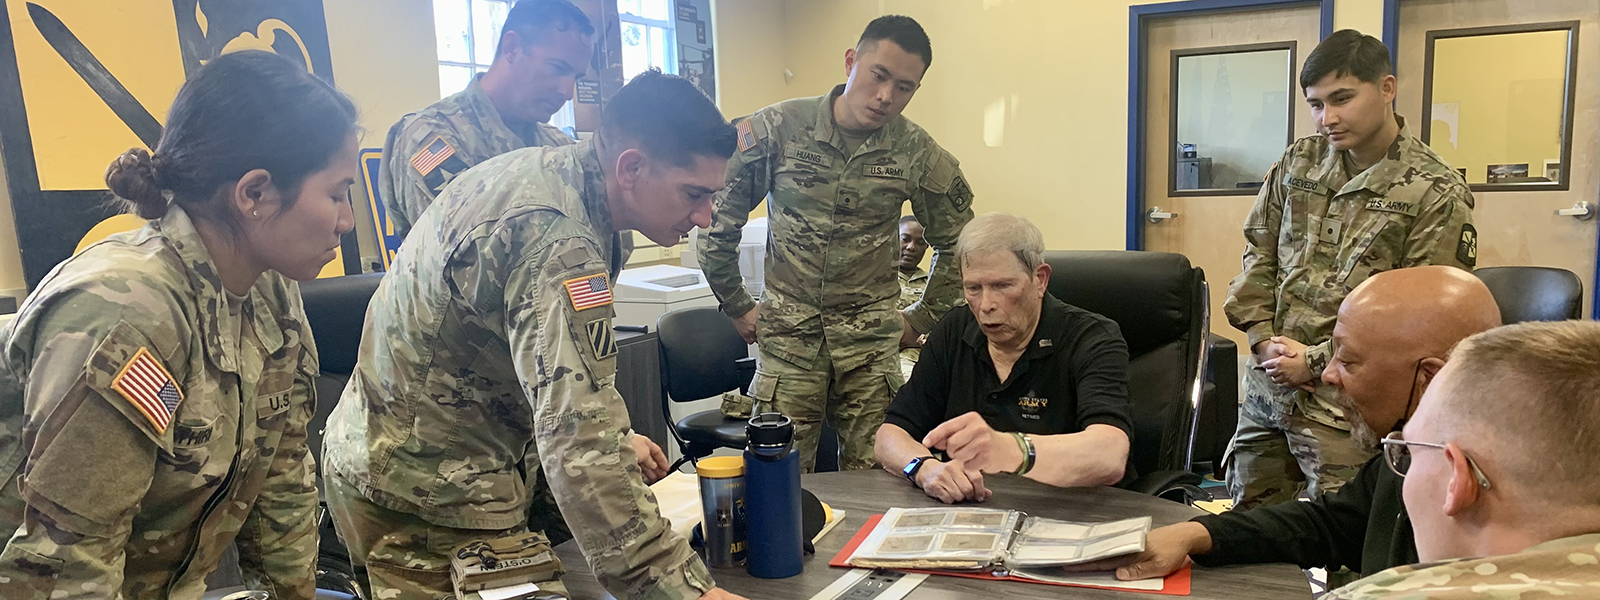 Paul Hunter ’62 meets with Army ROTC students and staff during a visit to campus as part of the 2022 Nanook Rendezvous alumni reunion